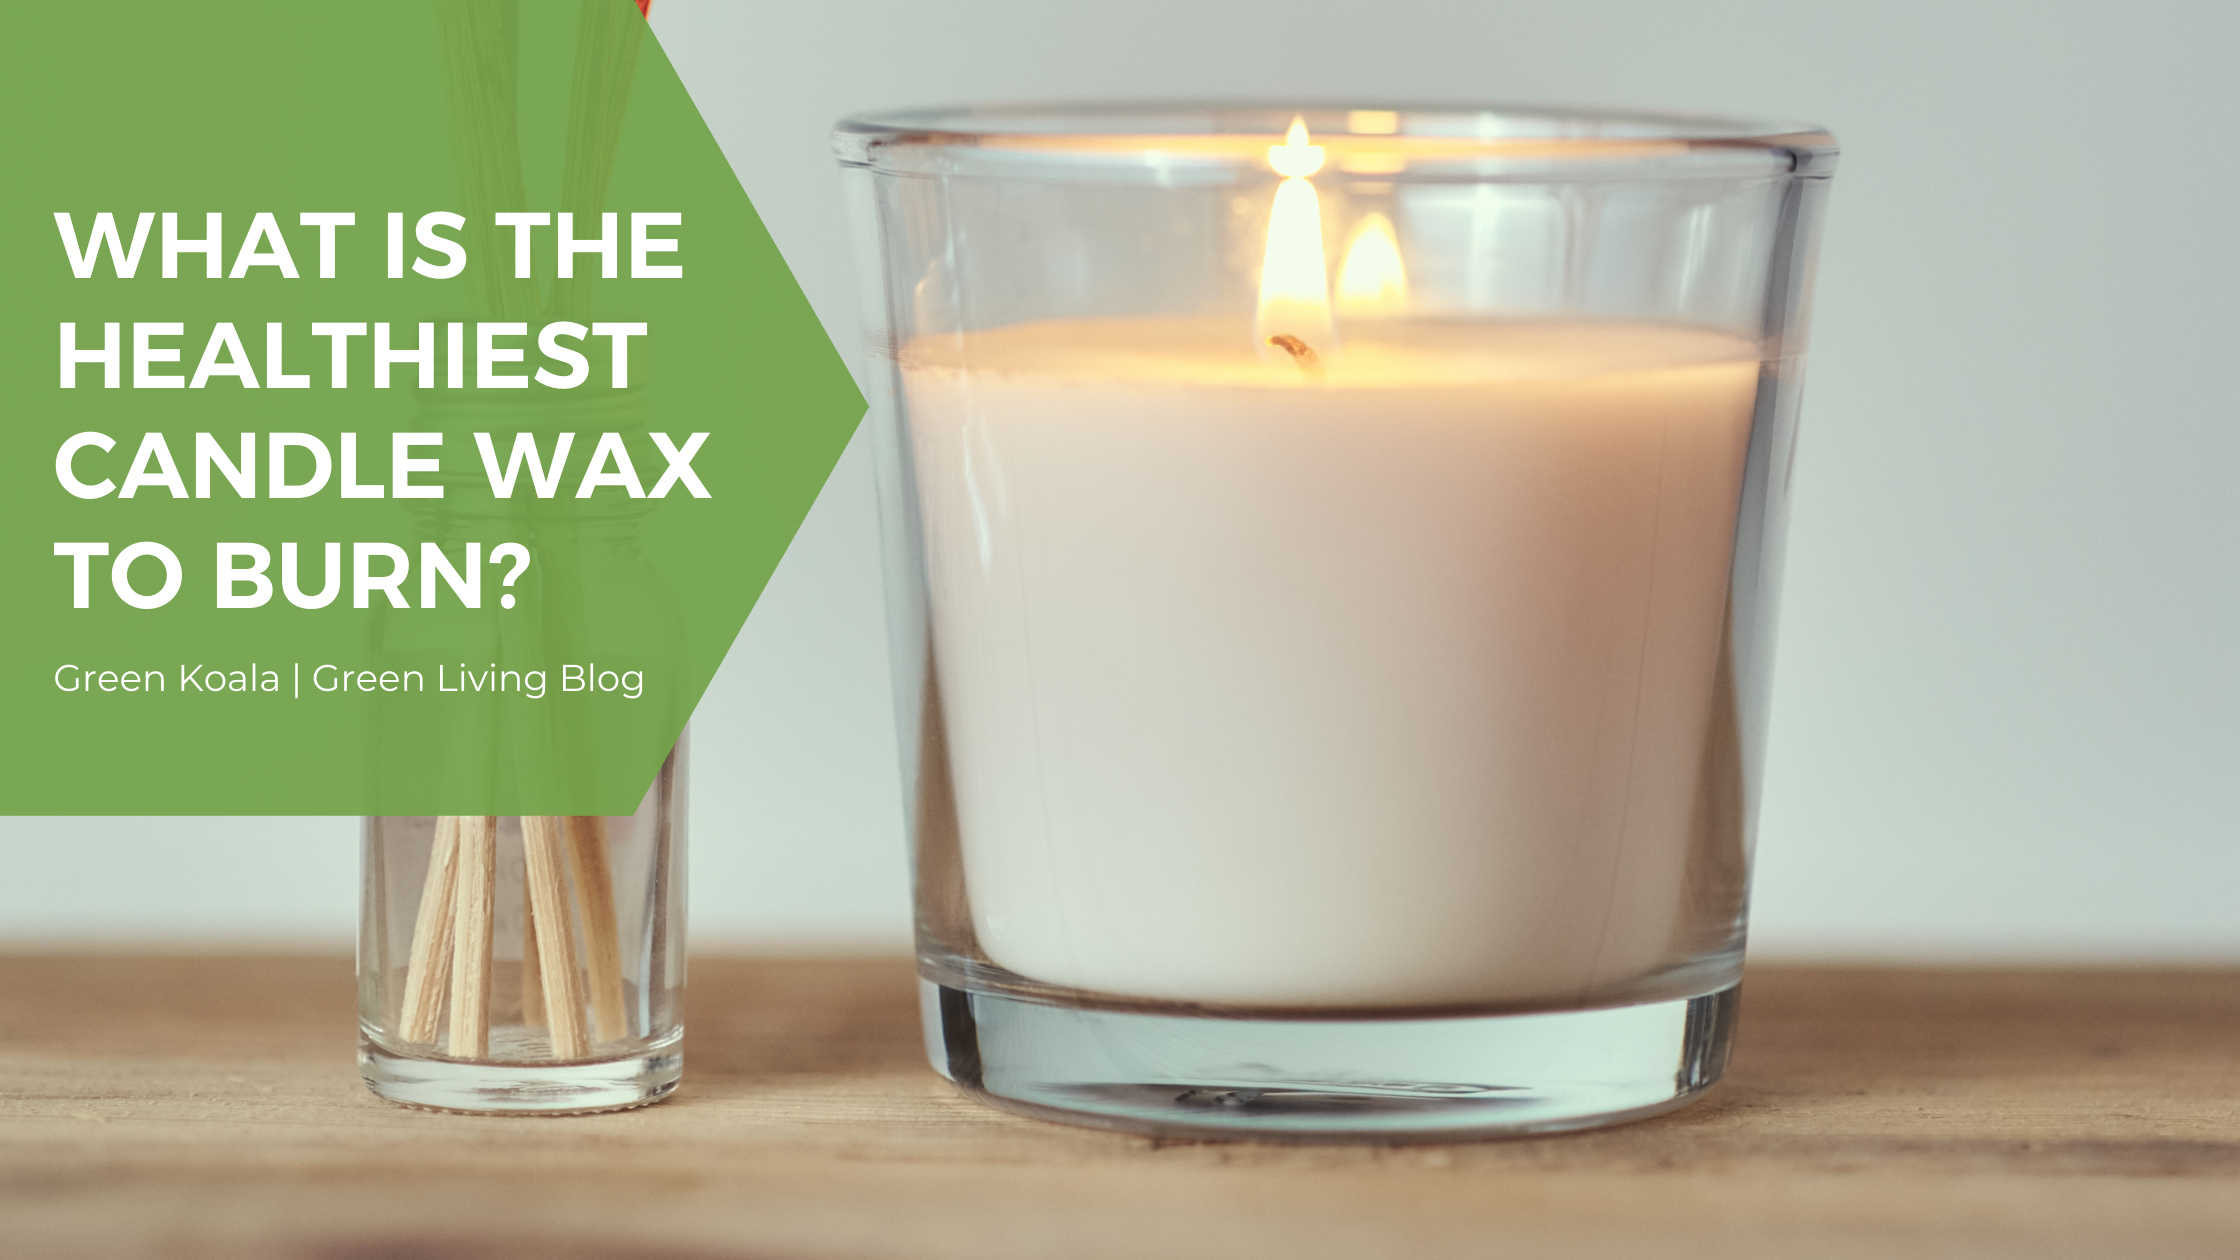 What is the healthiest candle wax to burn? – Green Koala